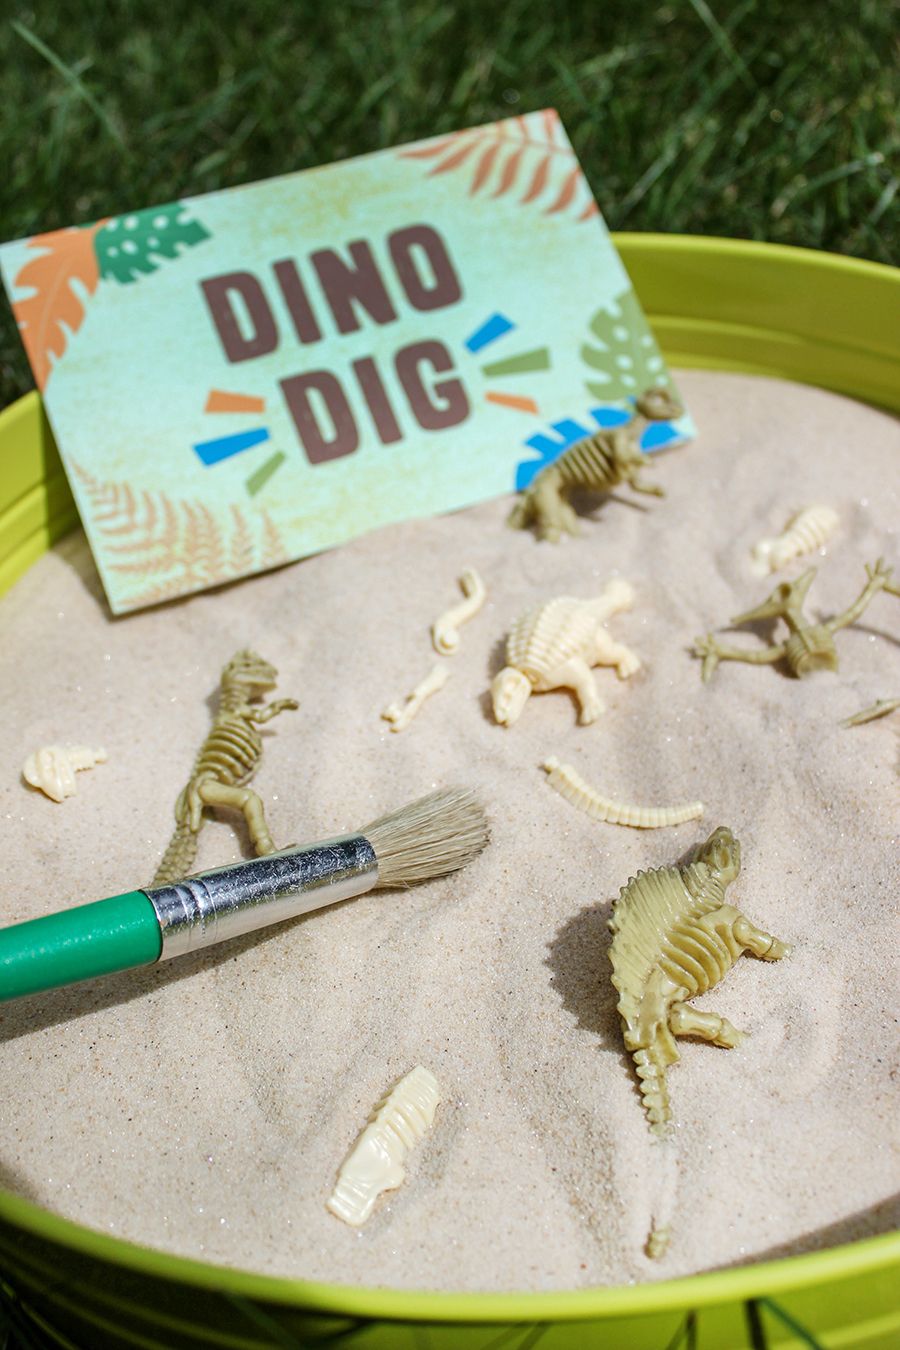 5 Dinosaur Party Games and Activities Guests Will Dig